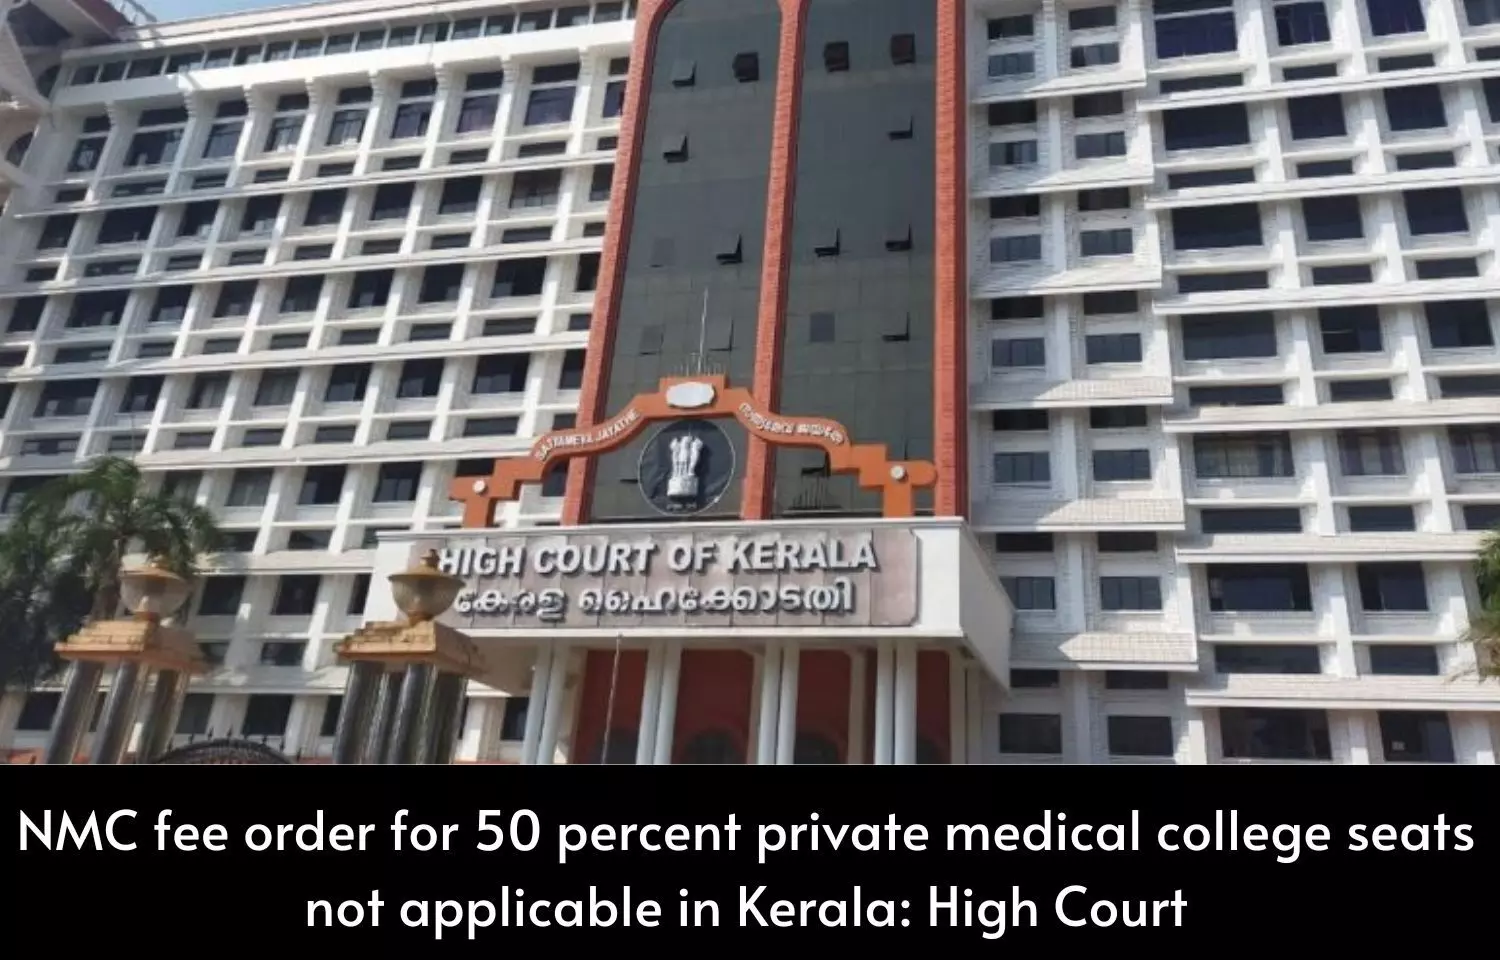 NMC fee order for 50 percent private medical college seats not applicable in Kerala, says High Court